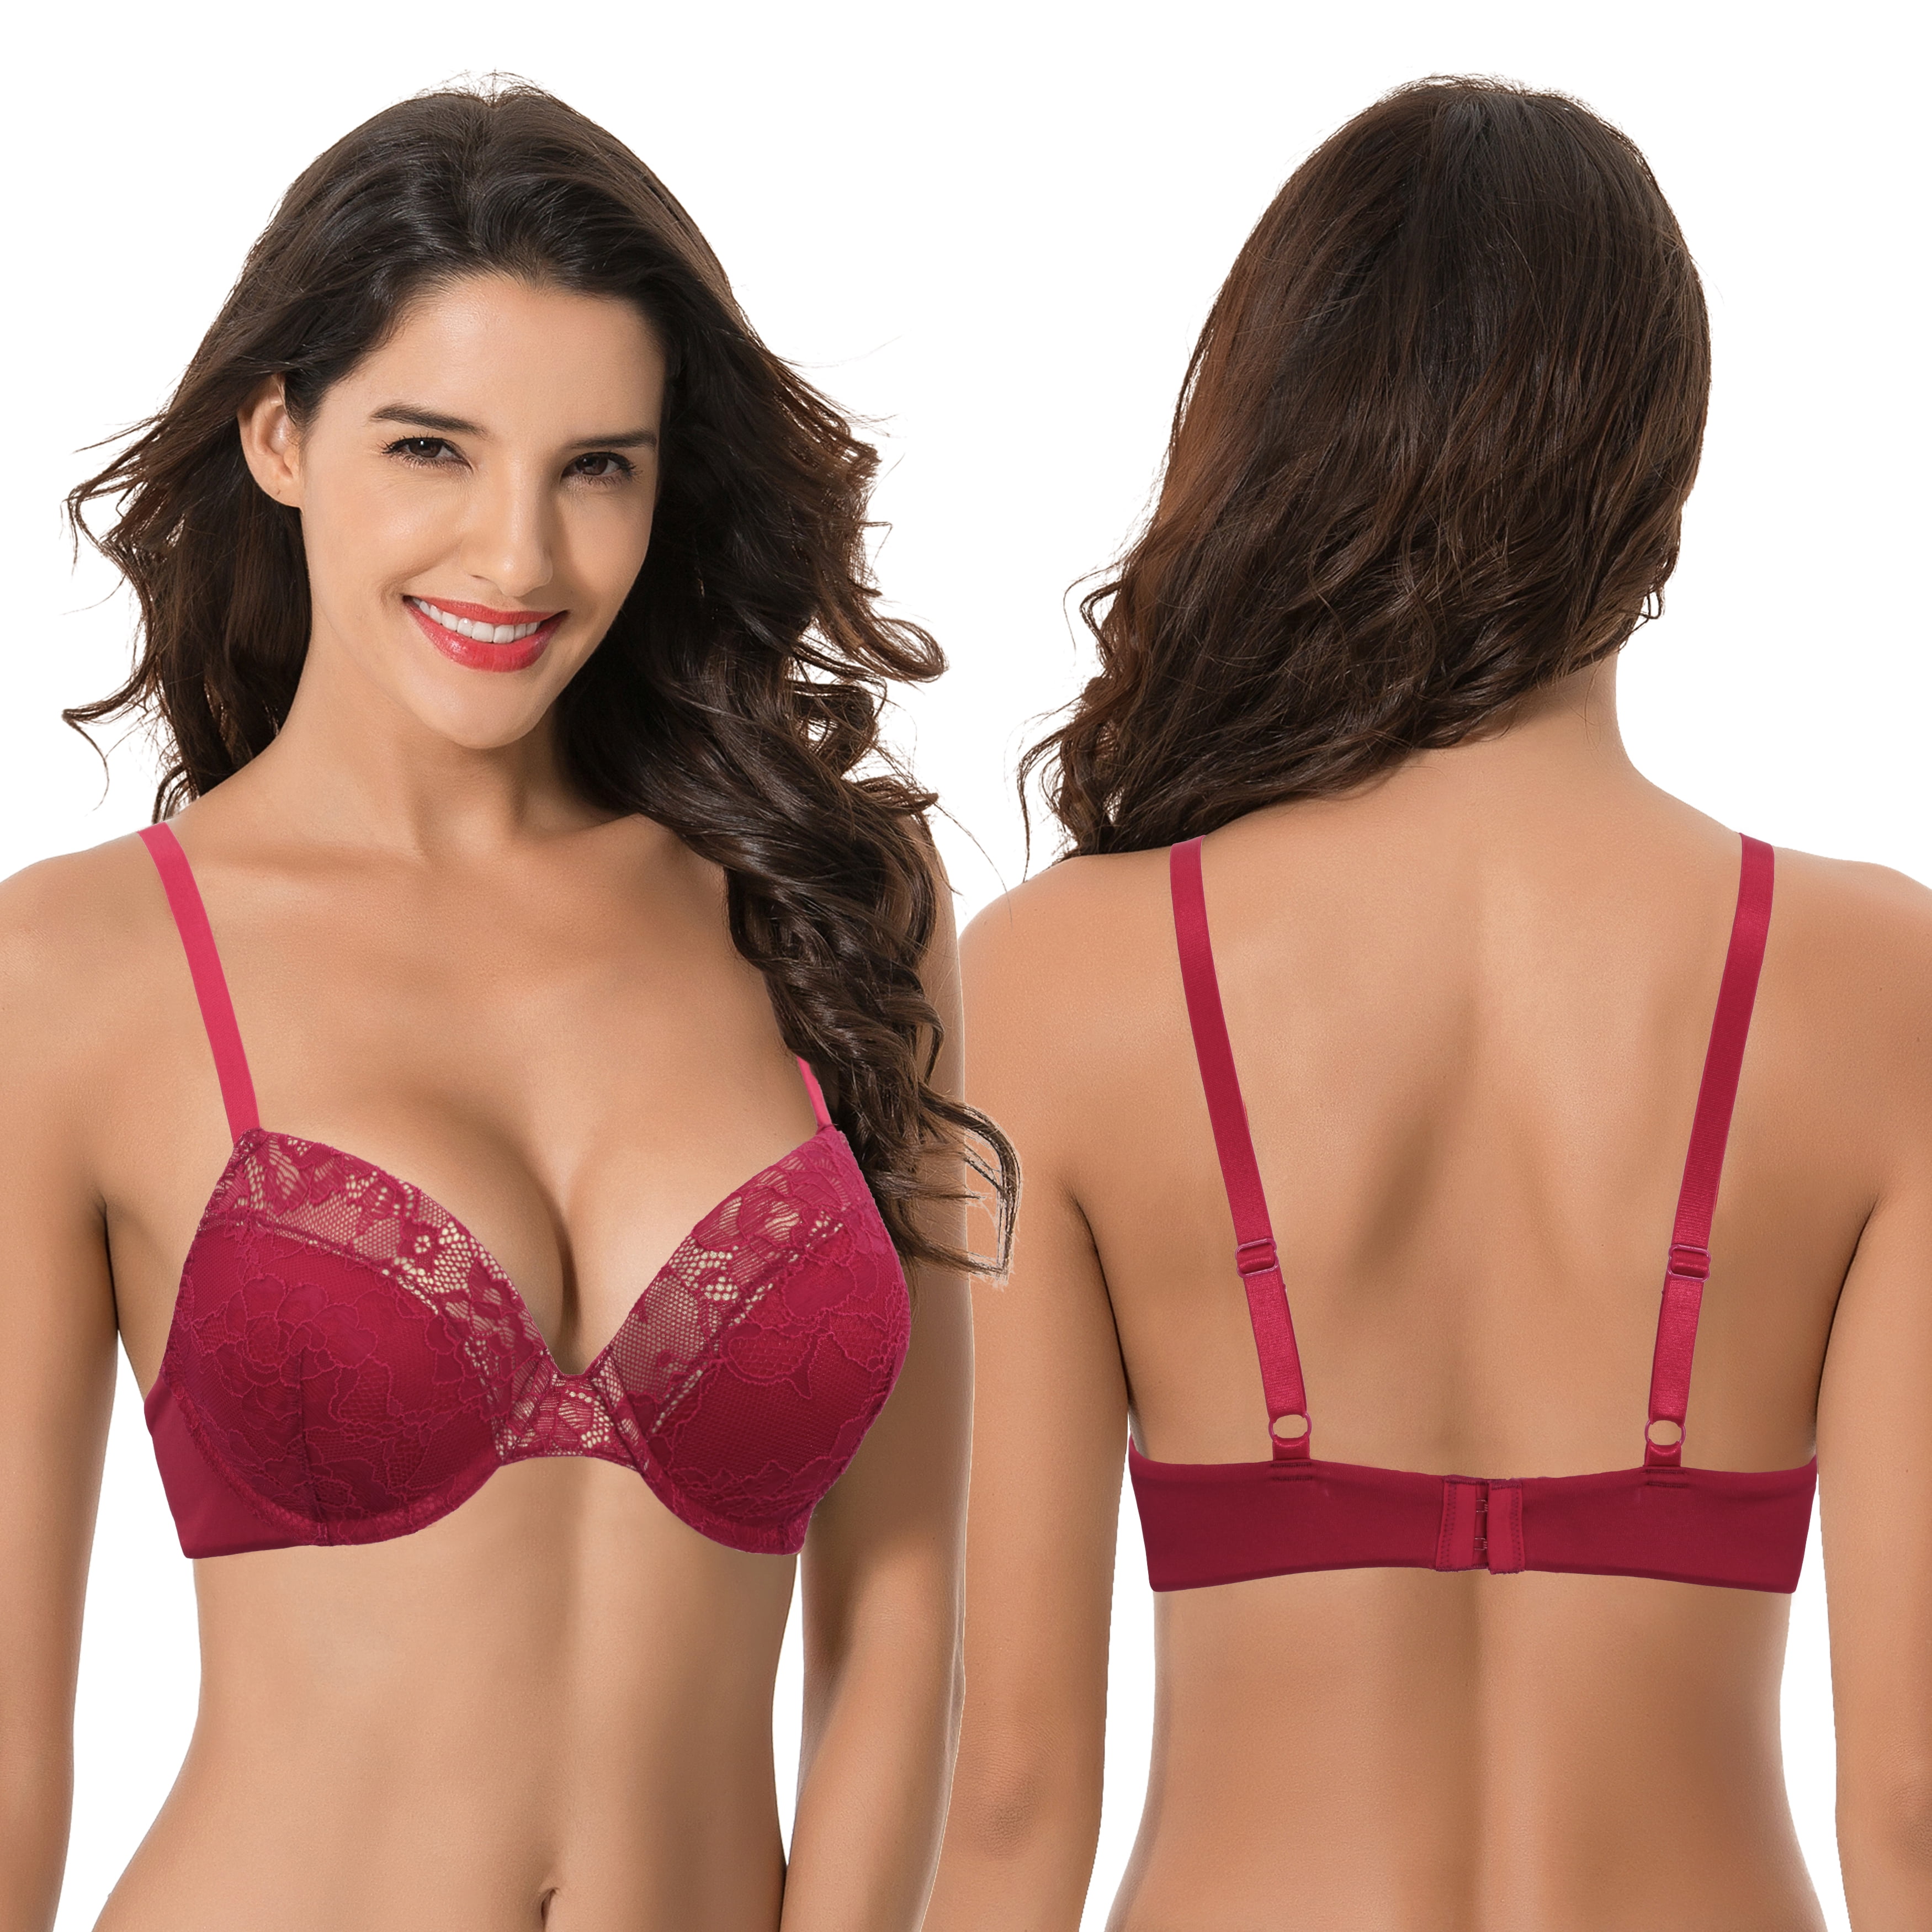 Red Muse - The Fiery Red Bra Push-Up for Bold Women – lacelandlingerie